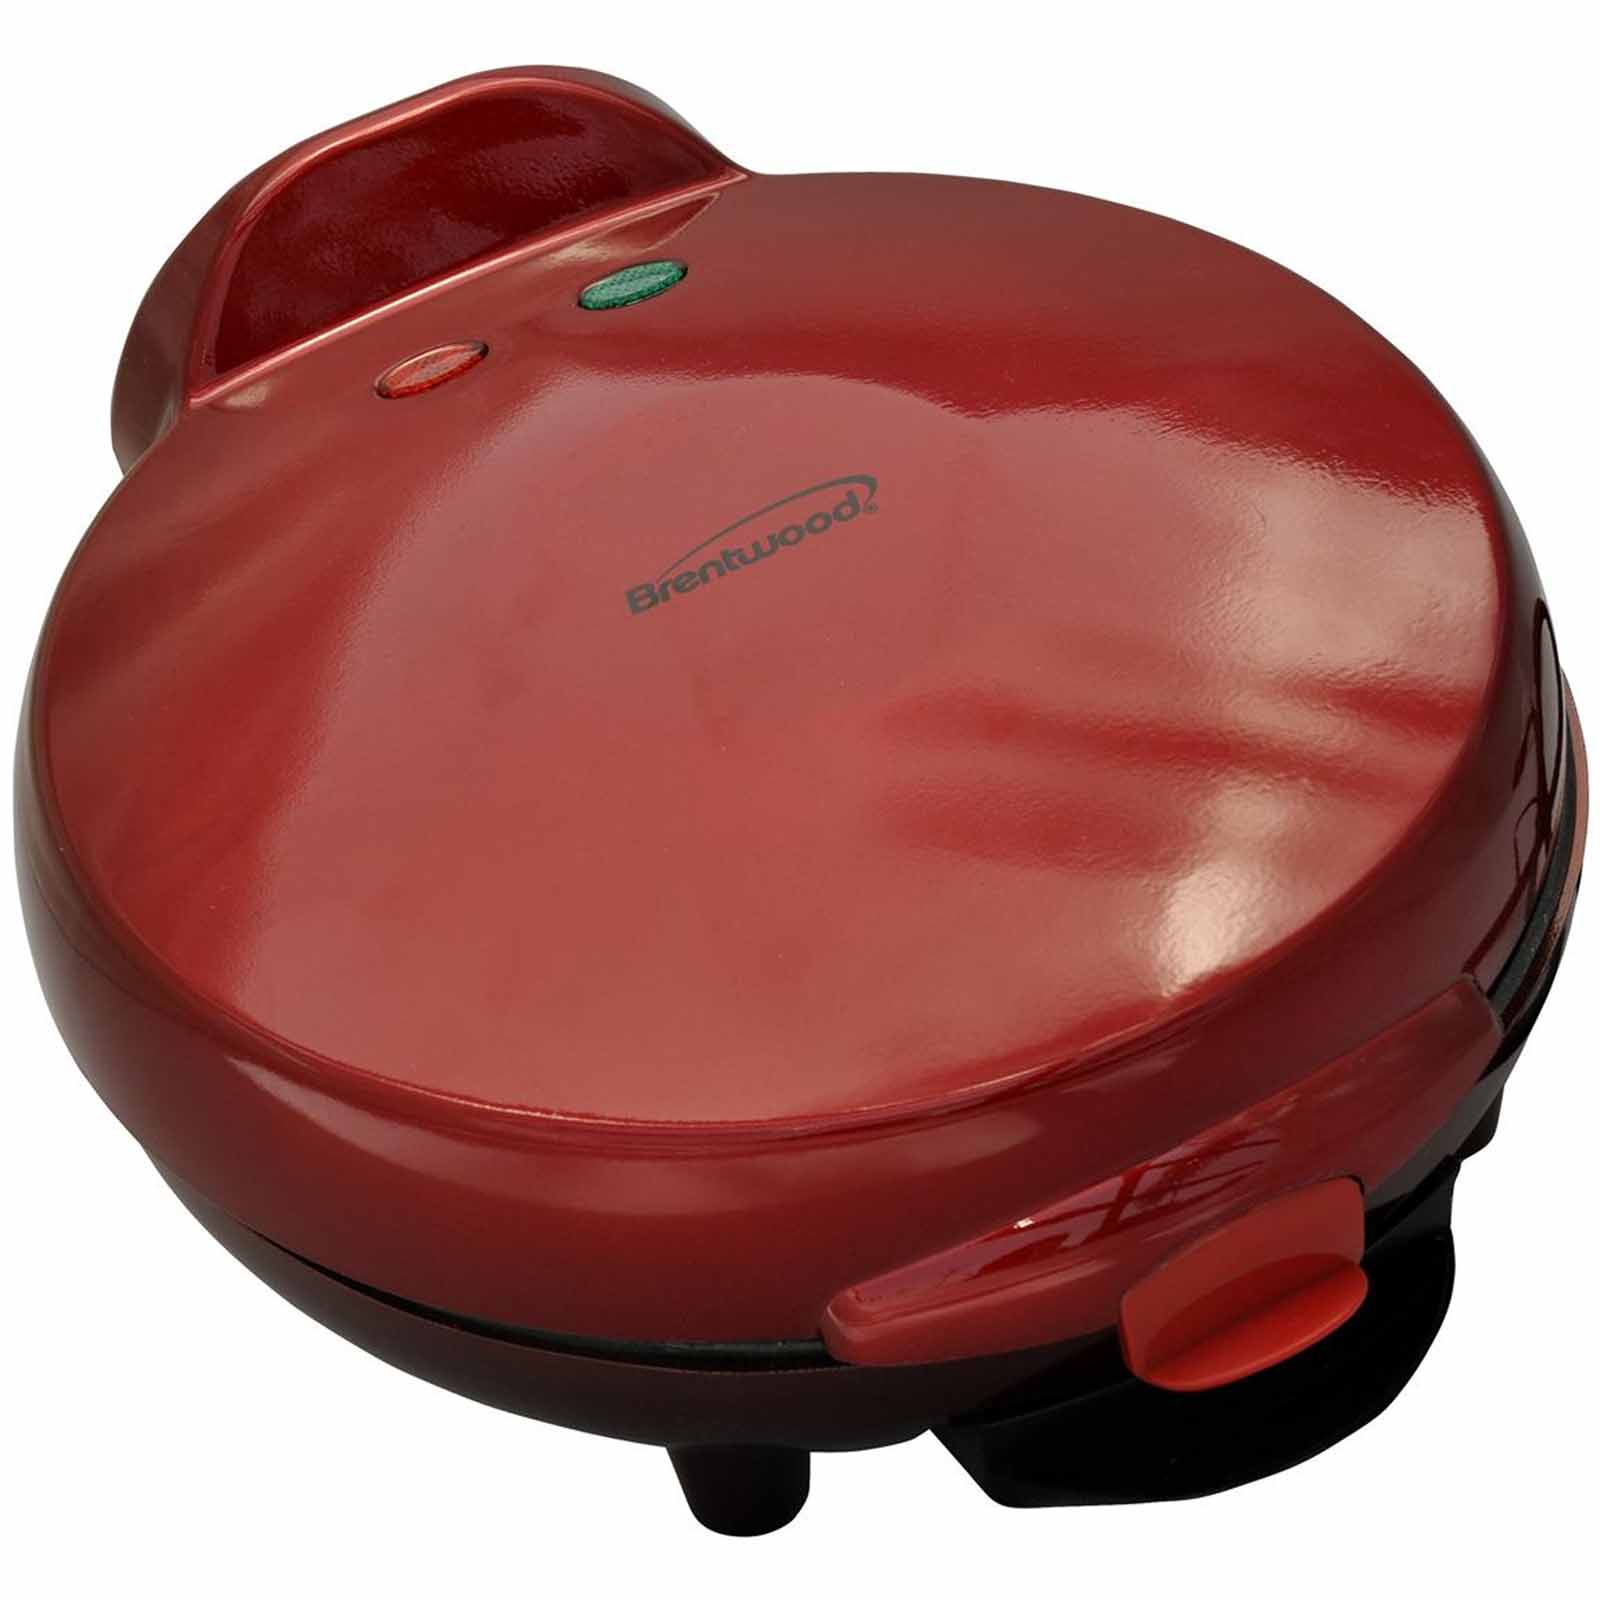 Brentwood 97083207M Quesadilla Maker - Red